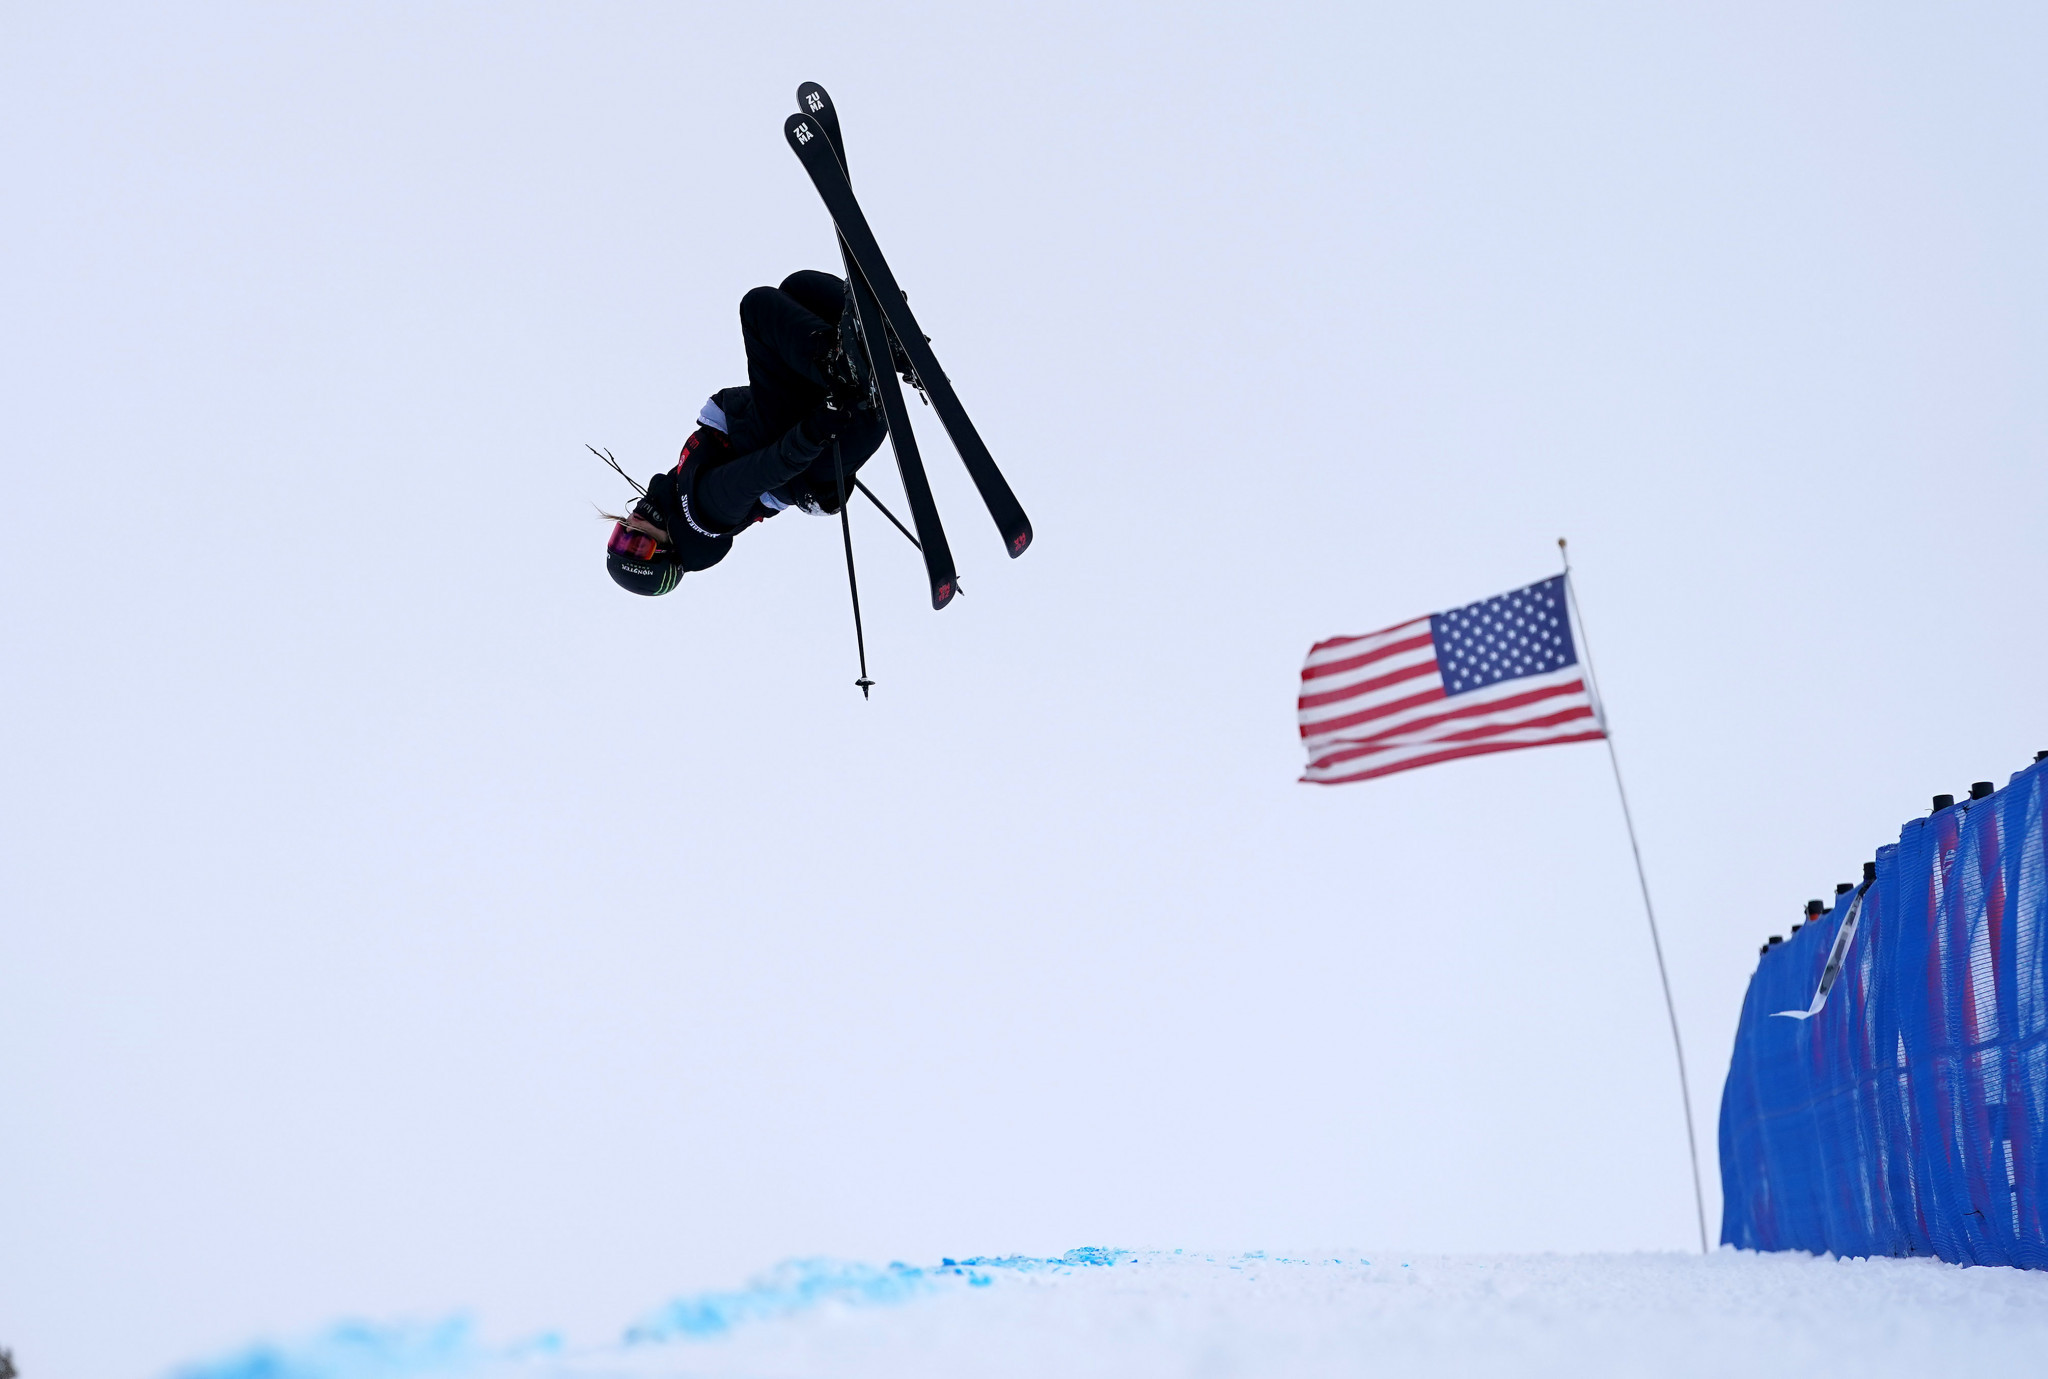 Olympic champion Sharpe searching for first FIS Freeski Halfpipe World Cup victory of the season